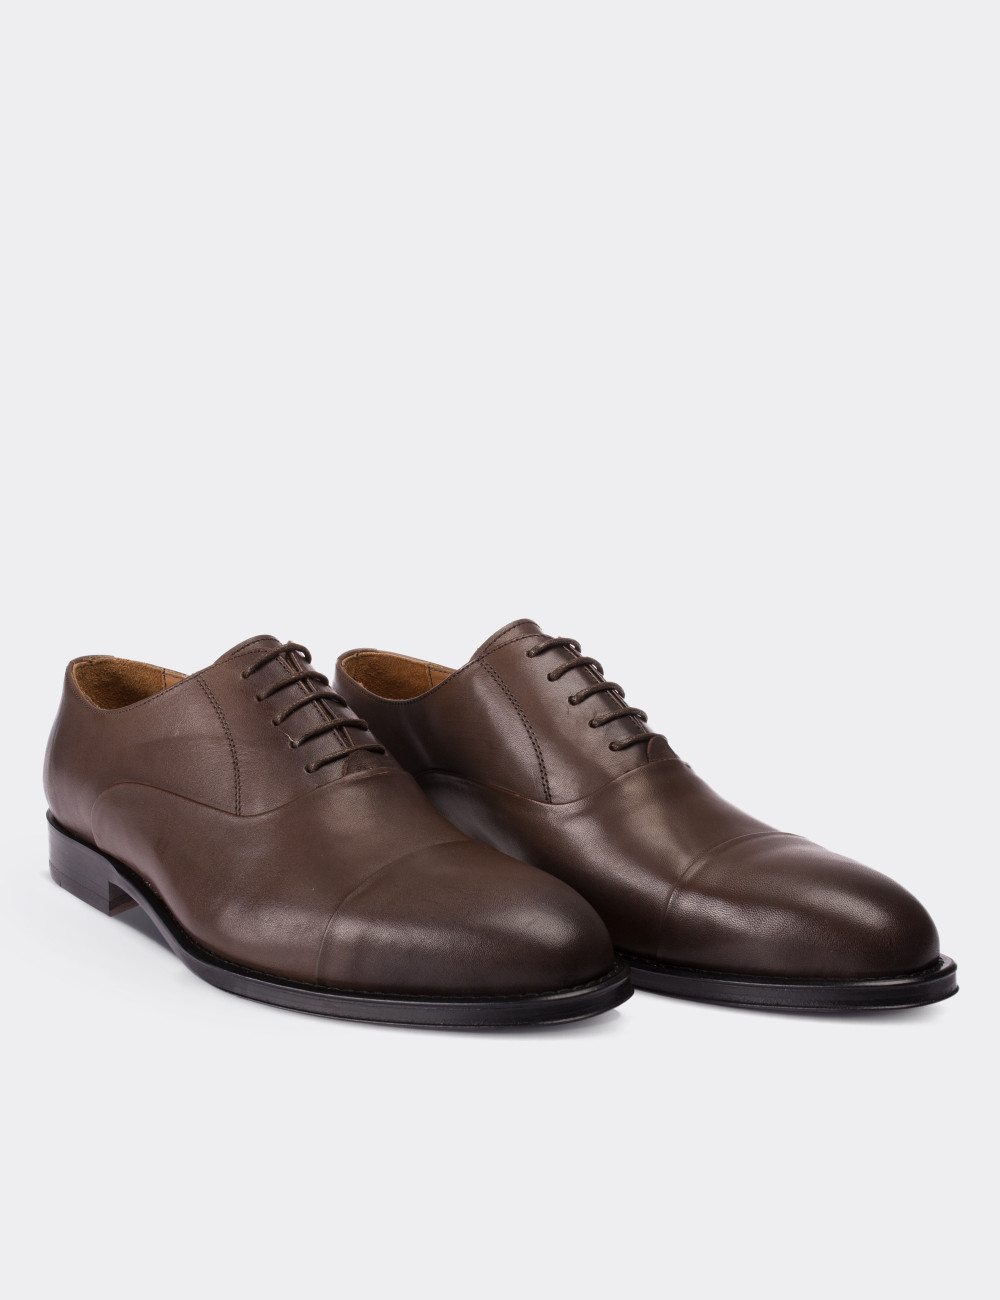 Sandstone  Leather Classic Shoes - 01590MVZNK01